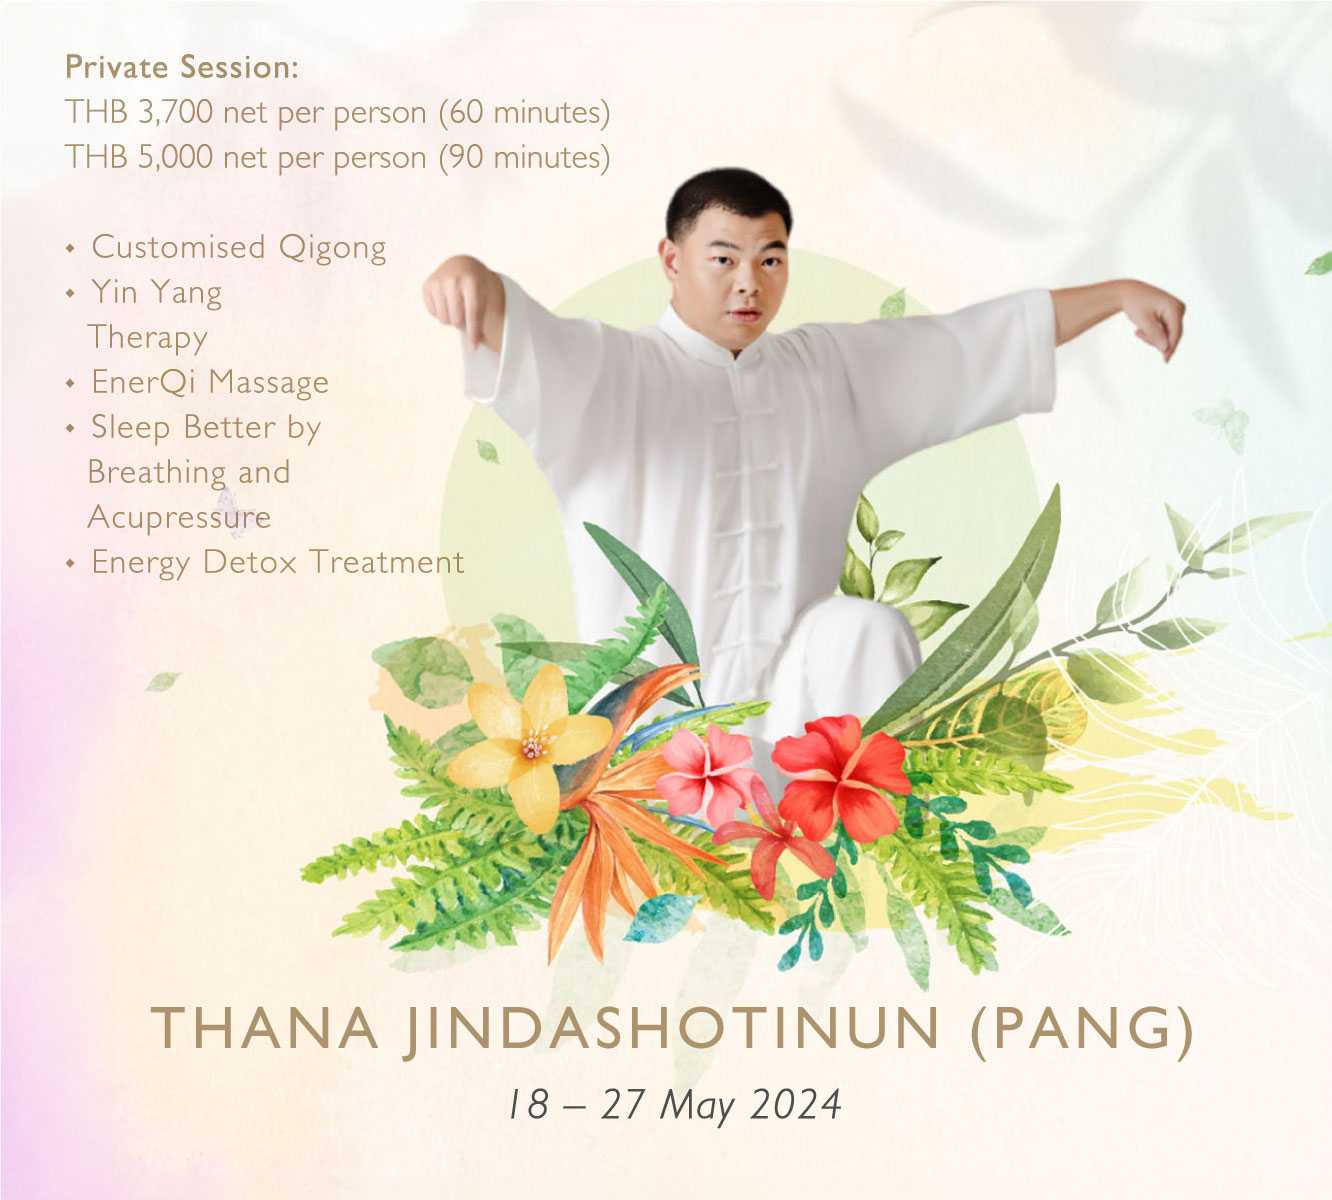 May Practitioner: Harmony Healer by Qigong Master (Private Session) - 60 minutes